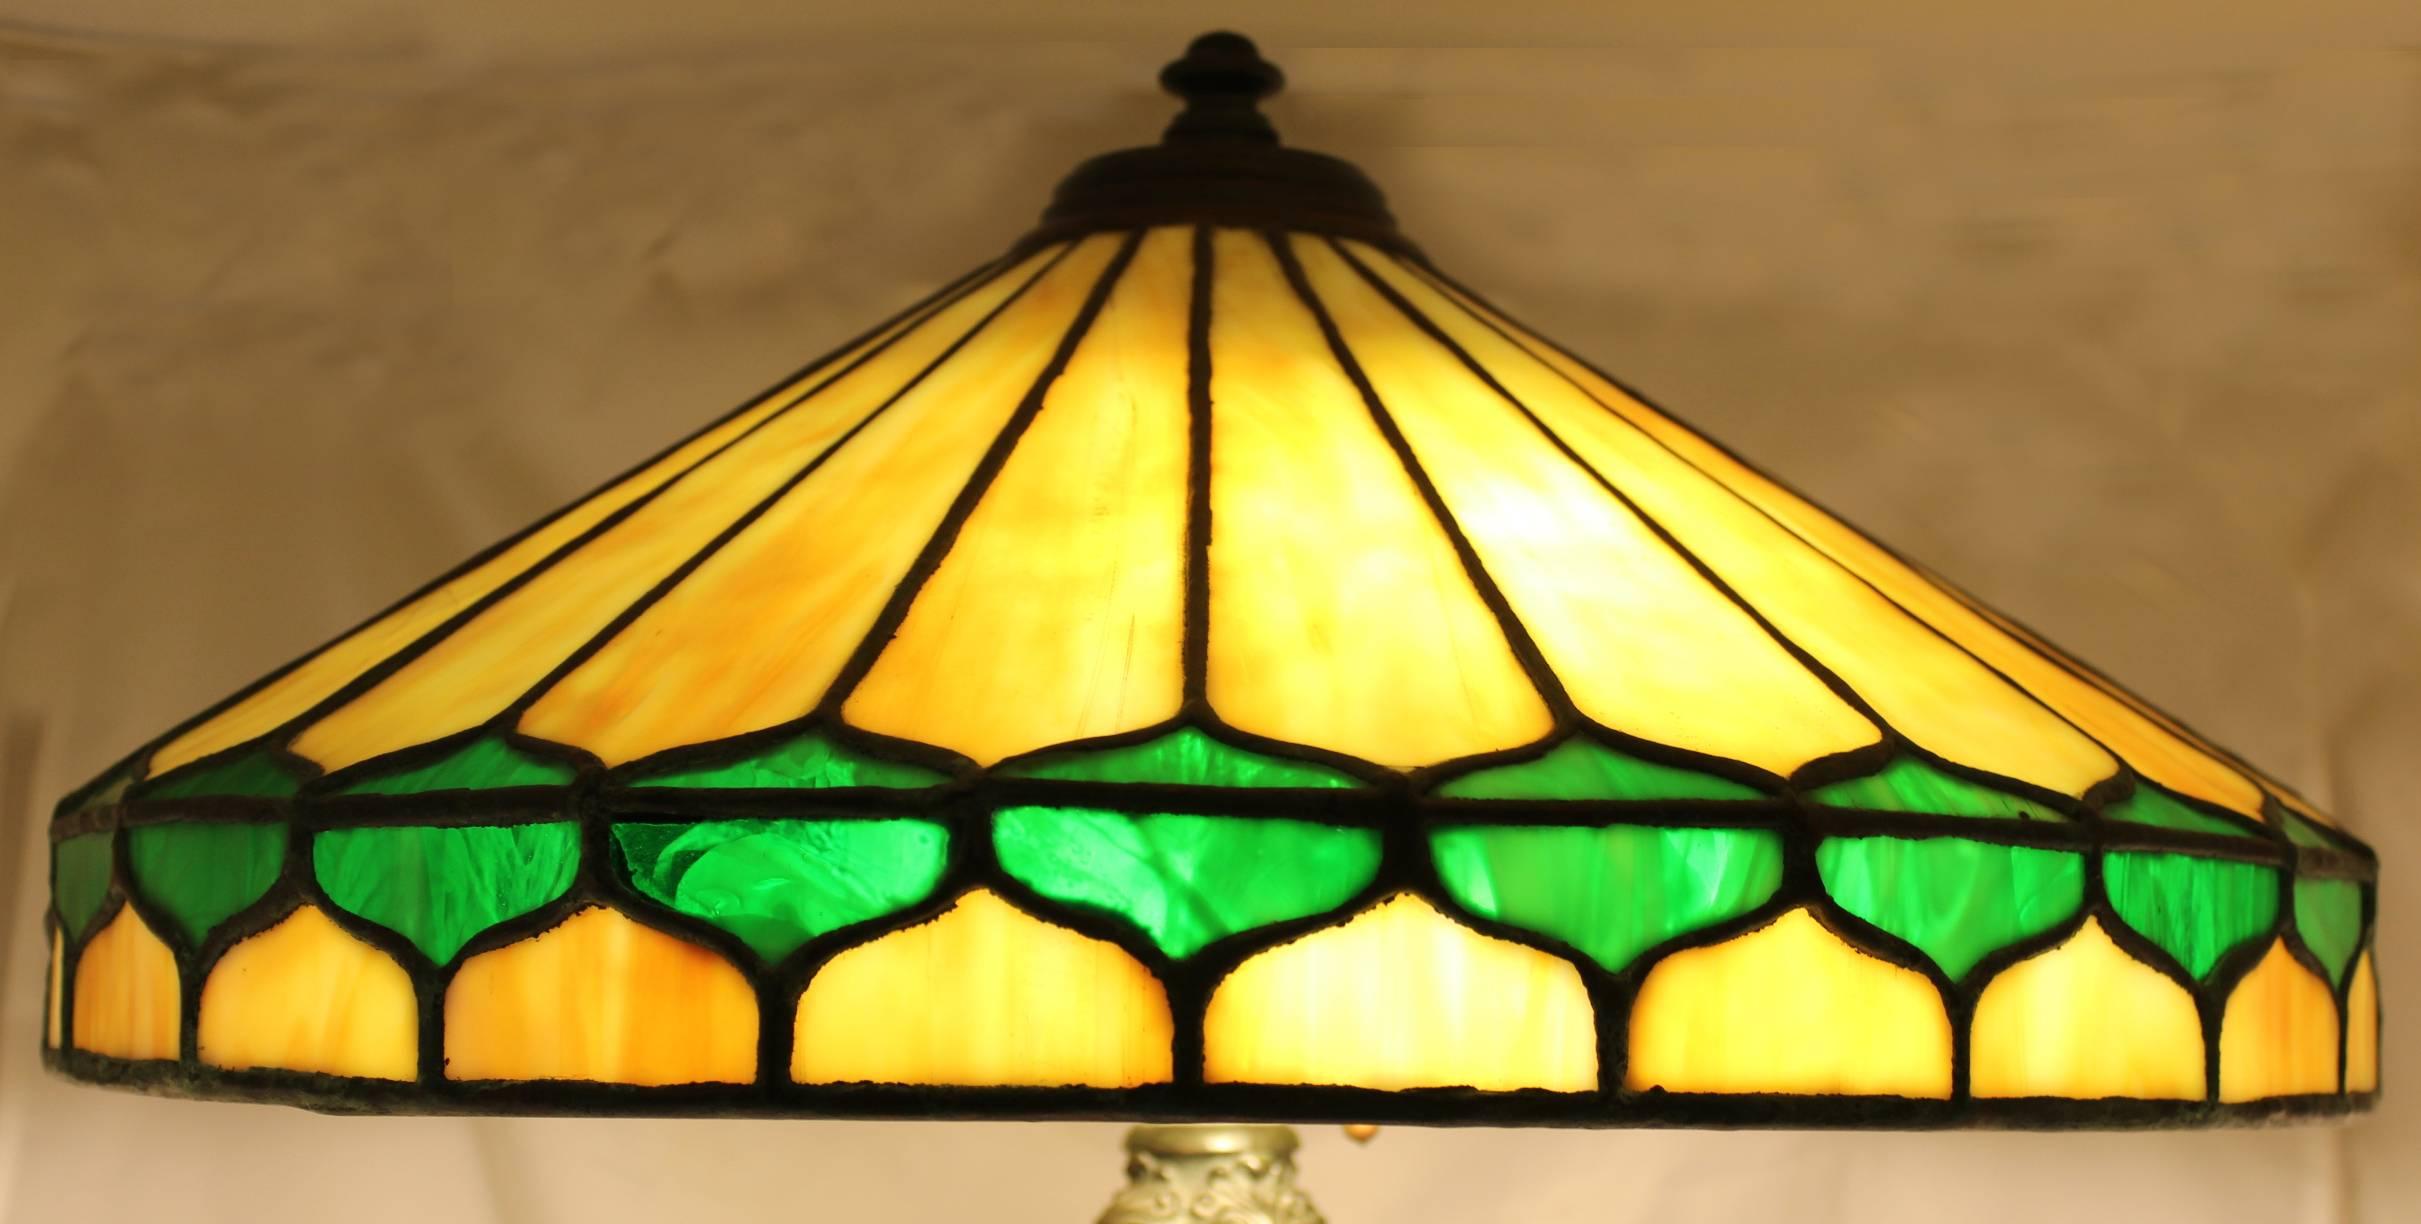 A fine 24 panel leaded glass Arts & Crafts three light table lamp with warm yellows and greens, with scrolled cast metal foliate decorated footed base, marked with 515 embossed, Excellent overall restored working condition, with recent wiring and